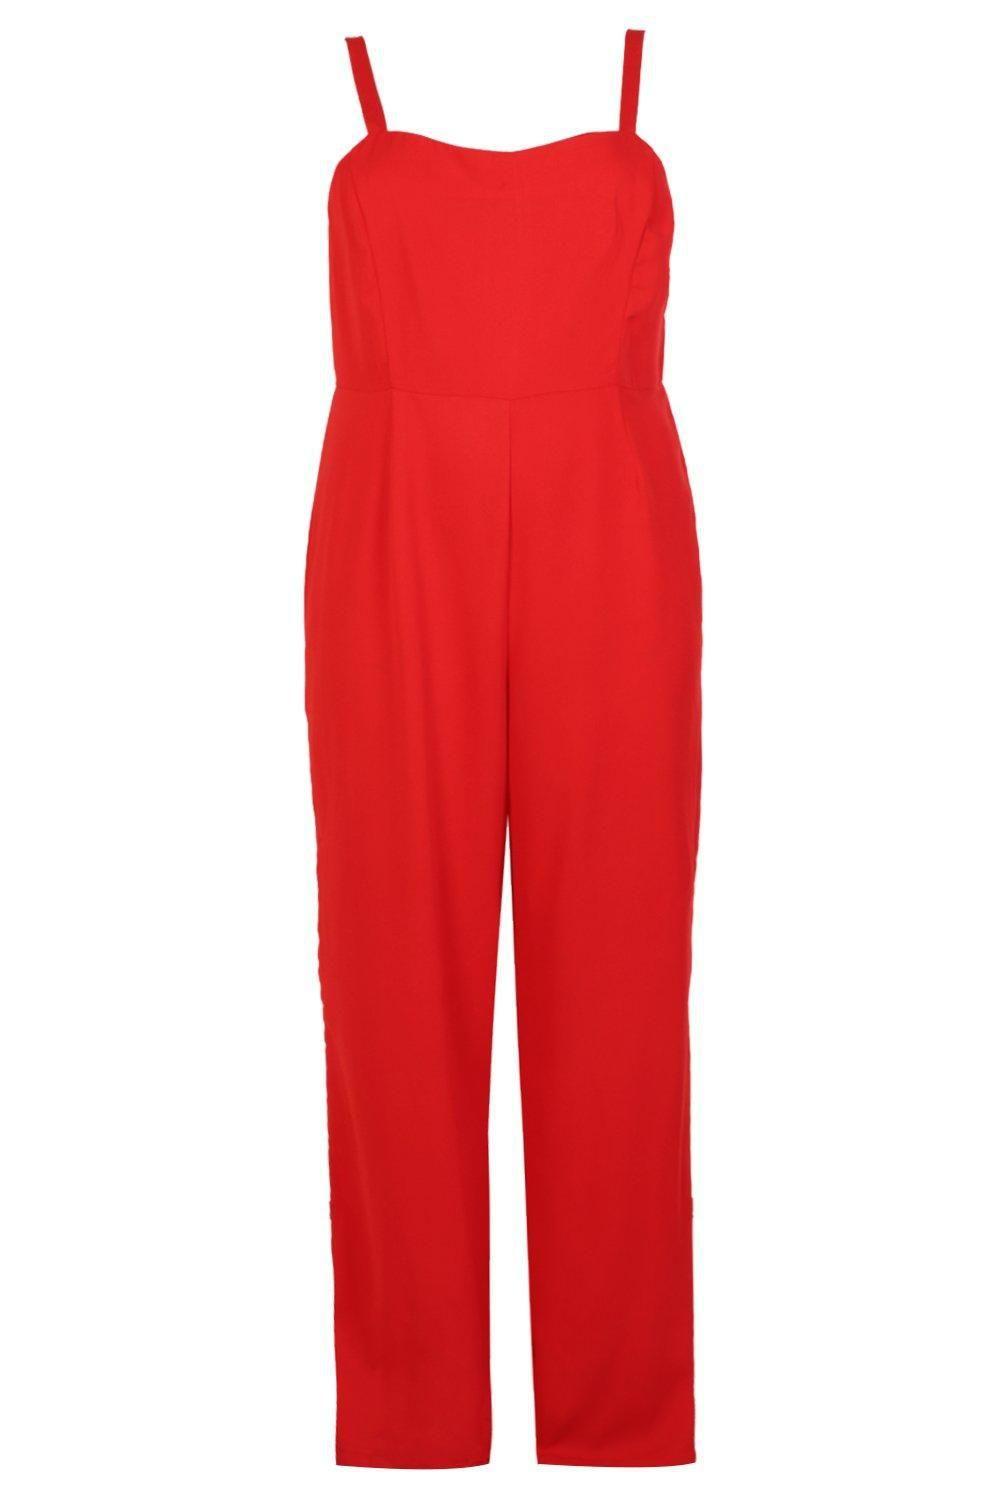 Square in Red Plus Logo - Boohoo Plus Square Neck Wide Leg Jumpsuit in Red - Lyst